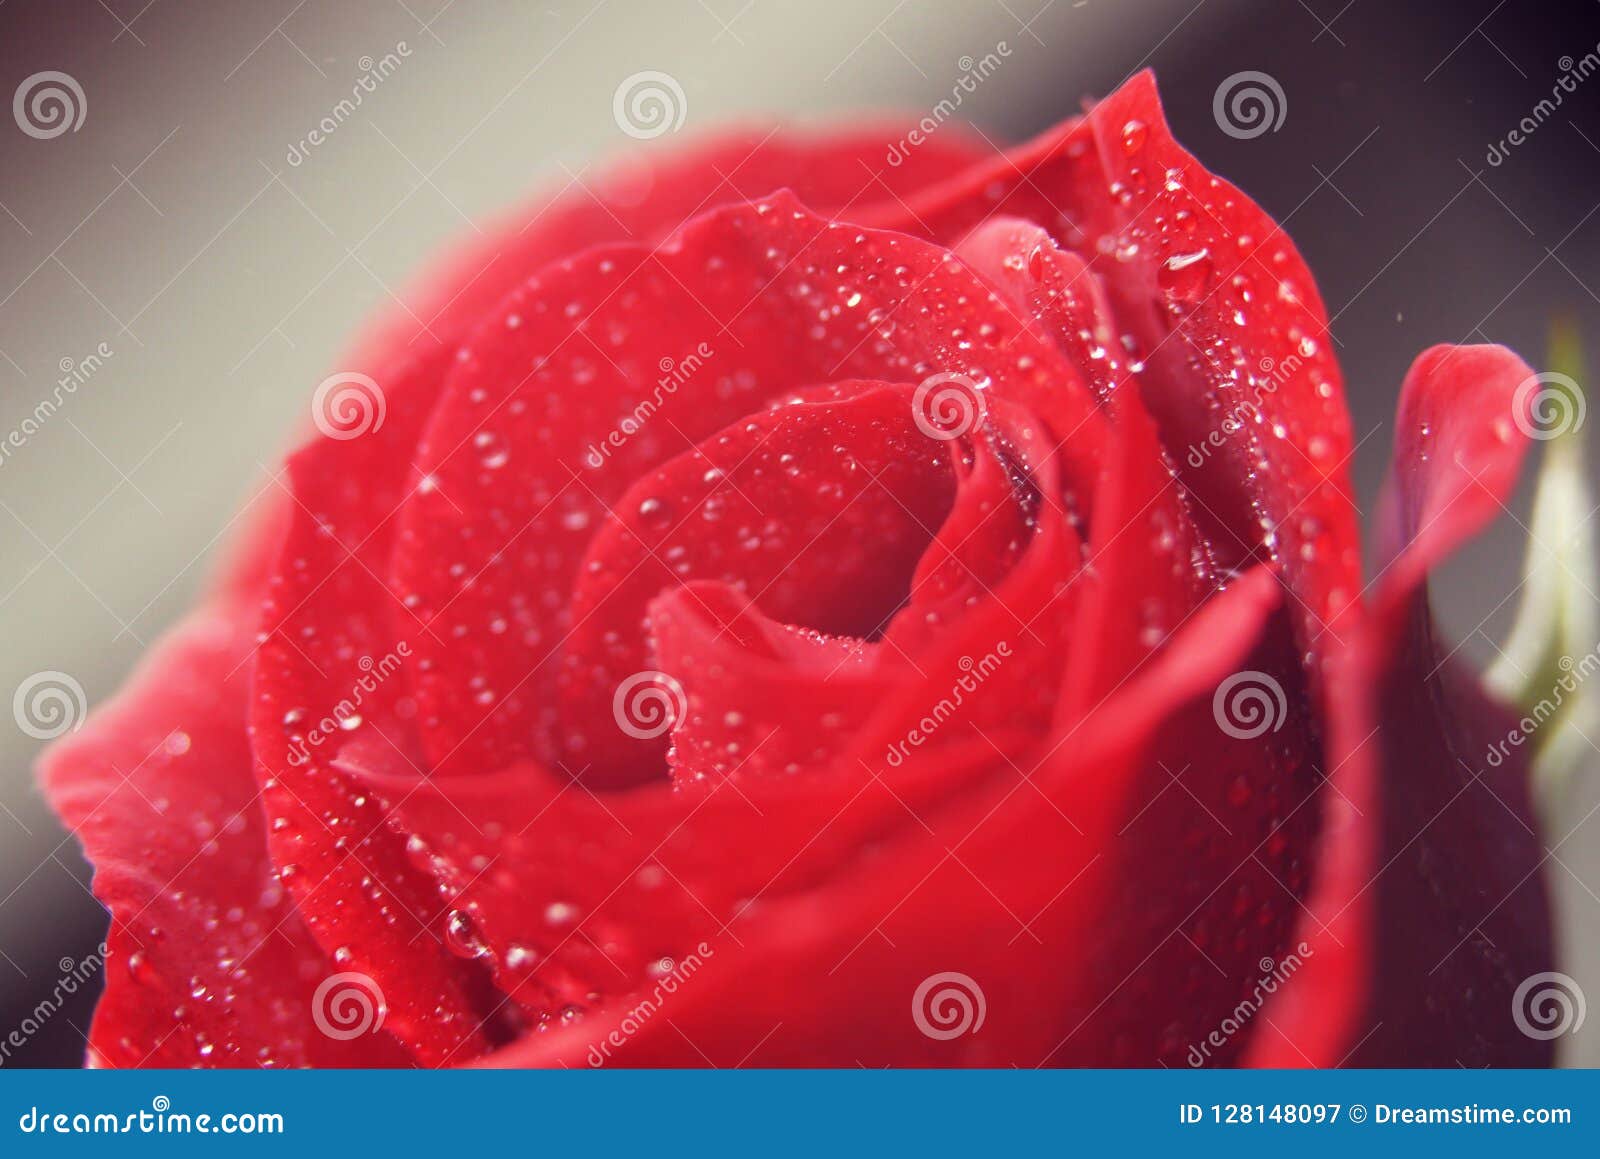 Red rose with water drops stock image. Image of dropsn - 128148097